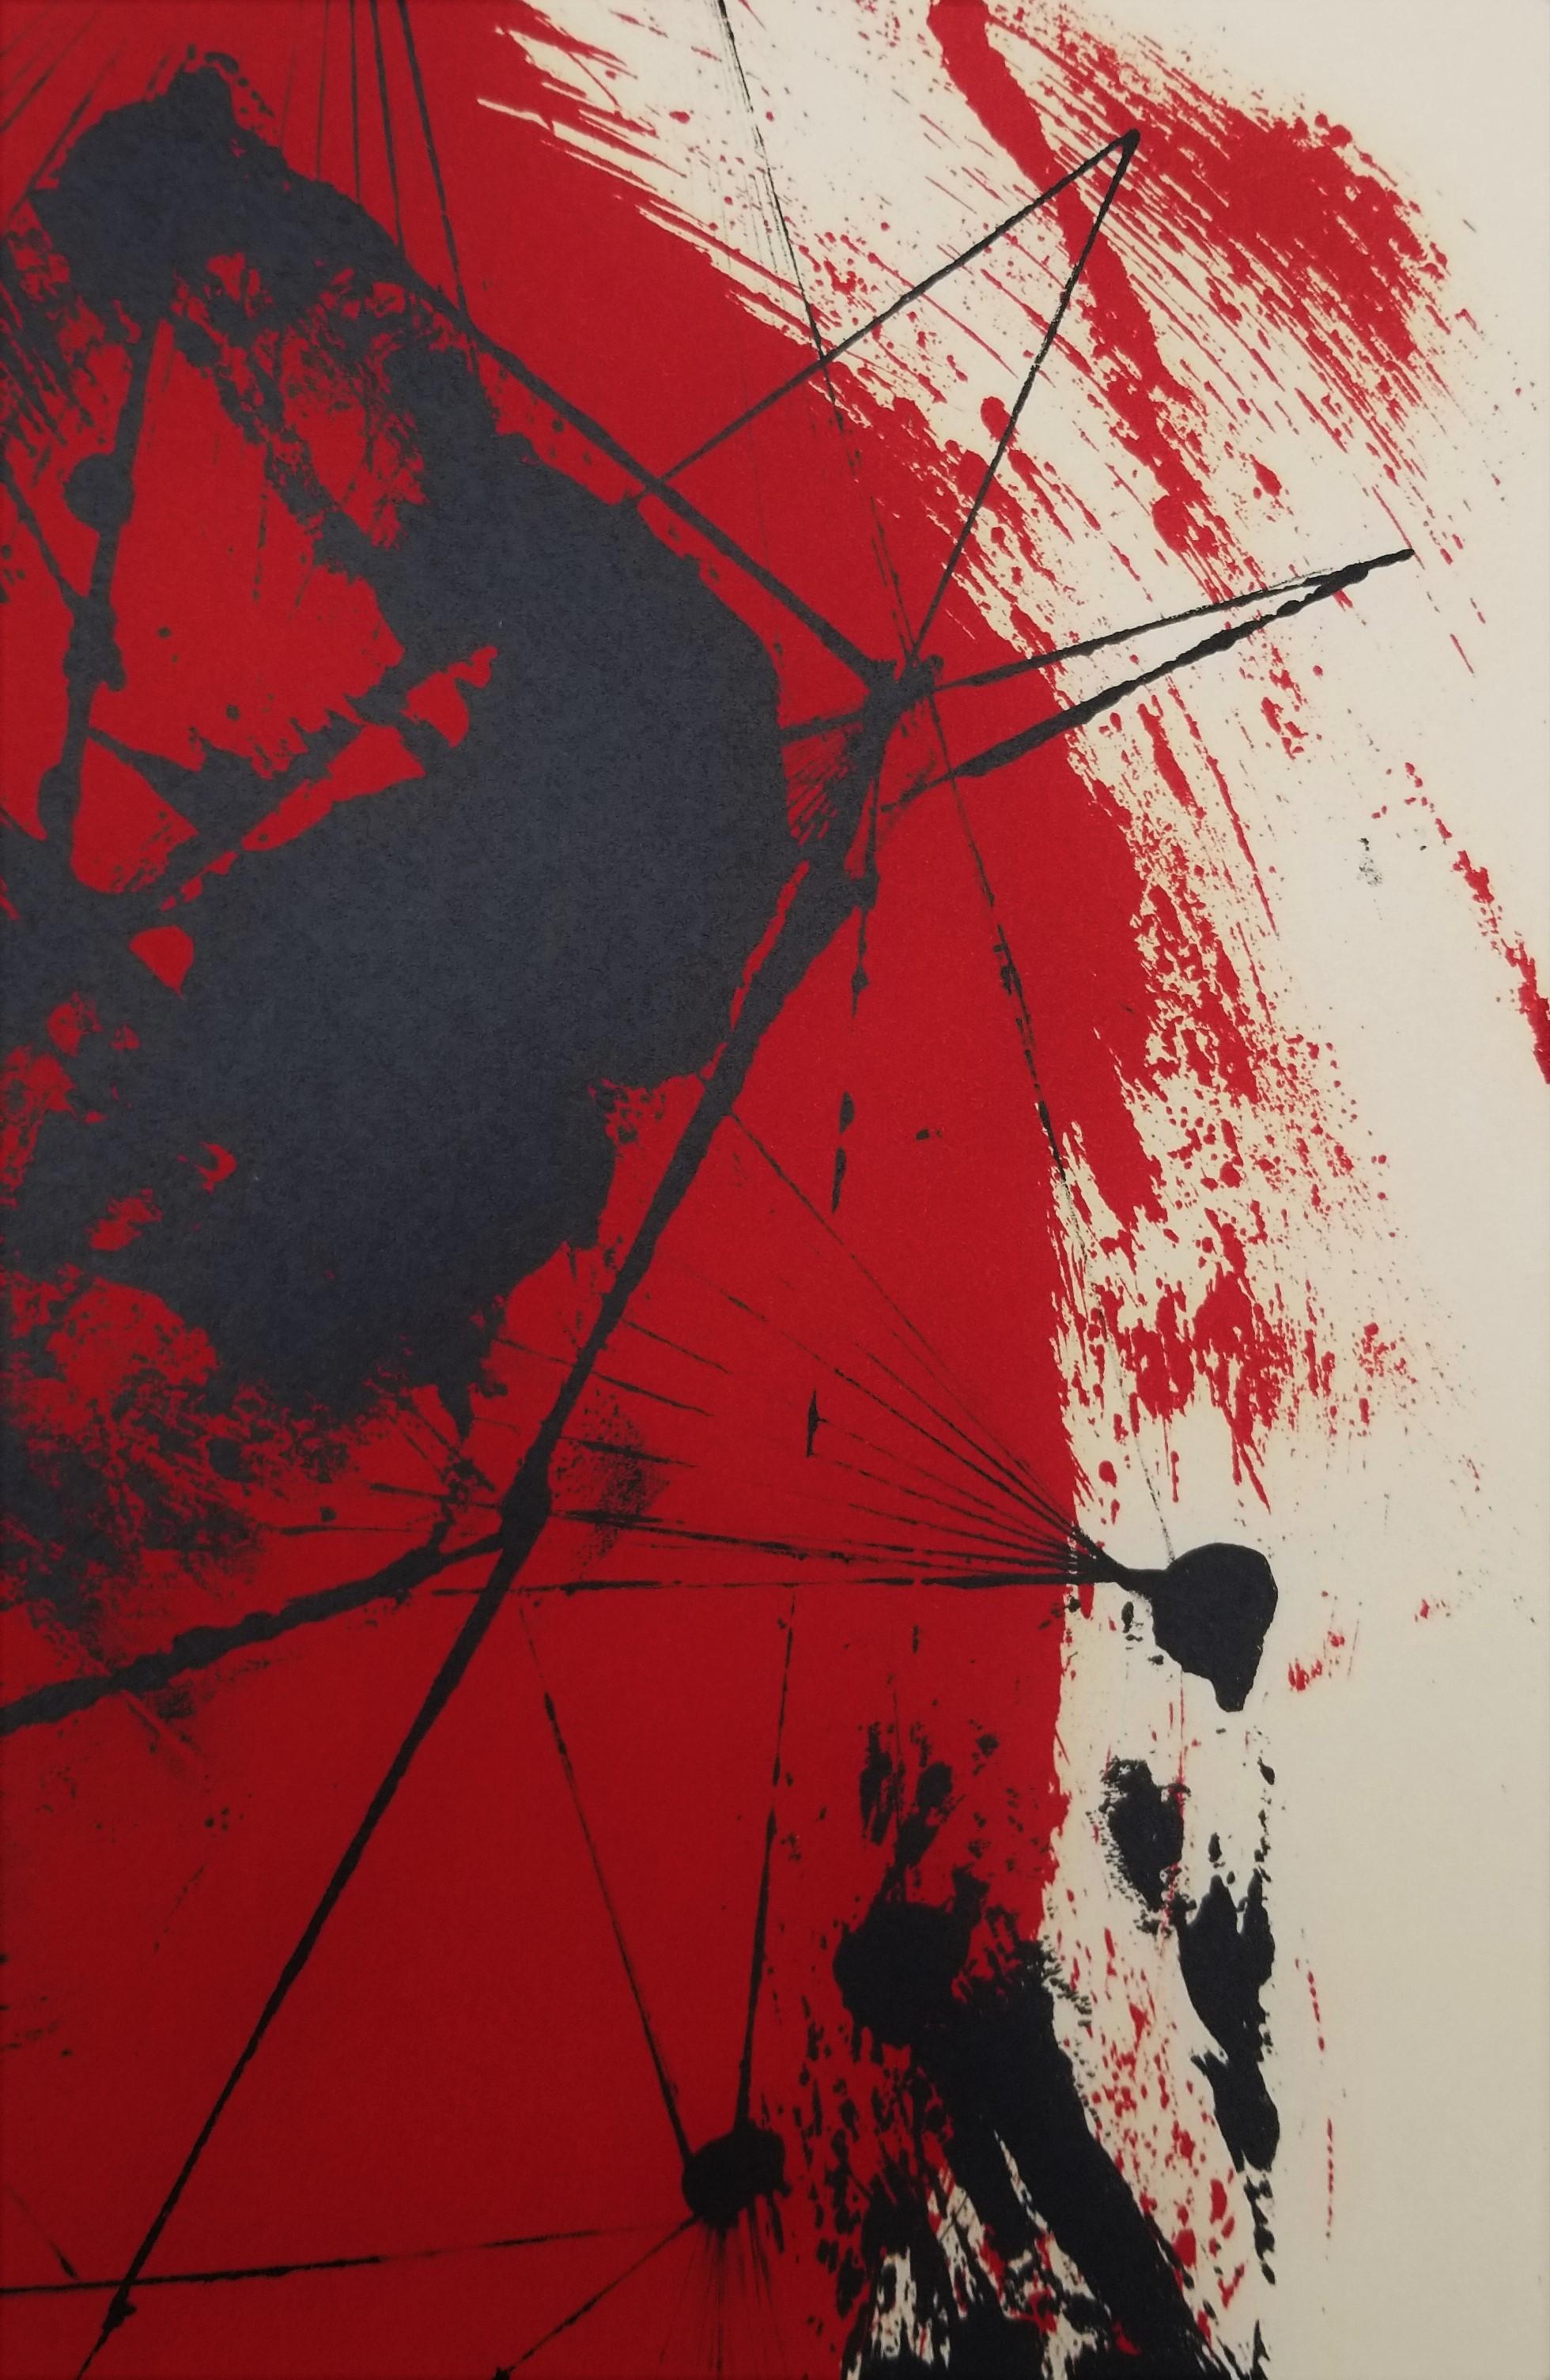 Red and Black II /// Abstract Expressionist Lynn Chadwick British Minimalism Art For Sale 10